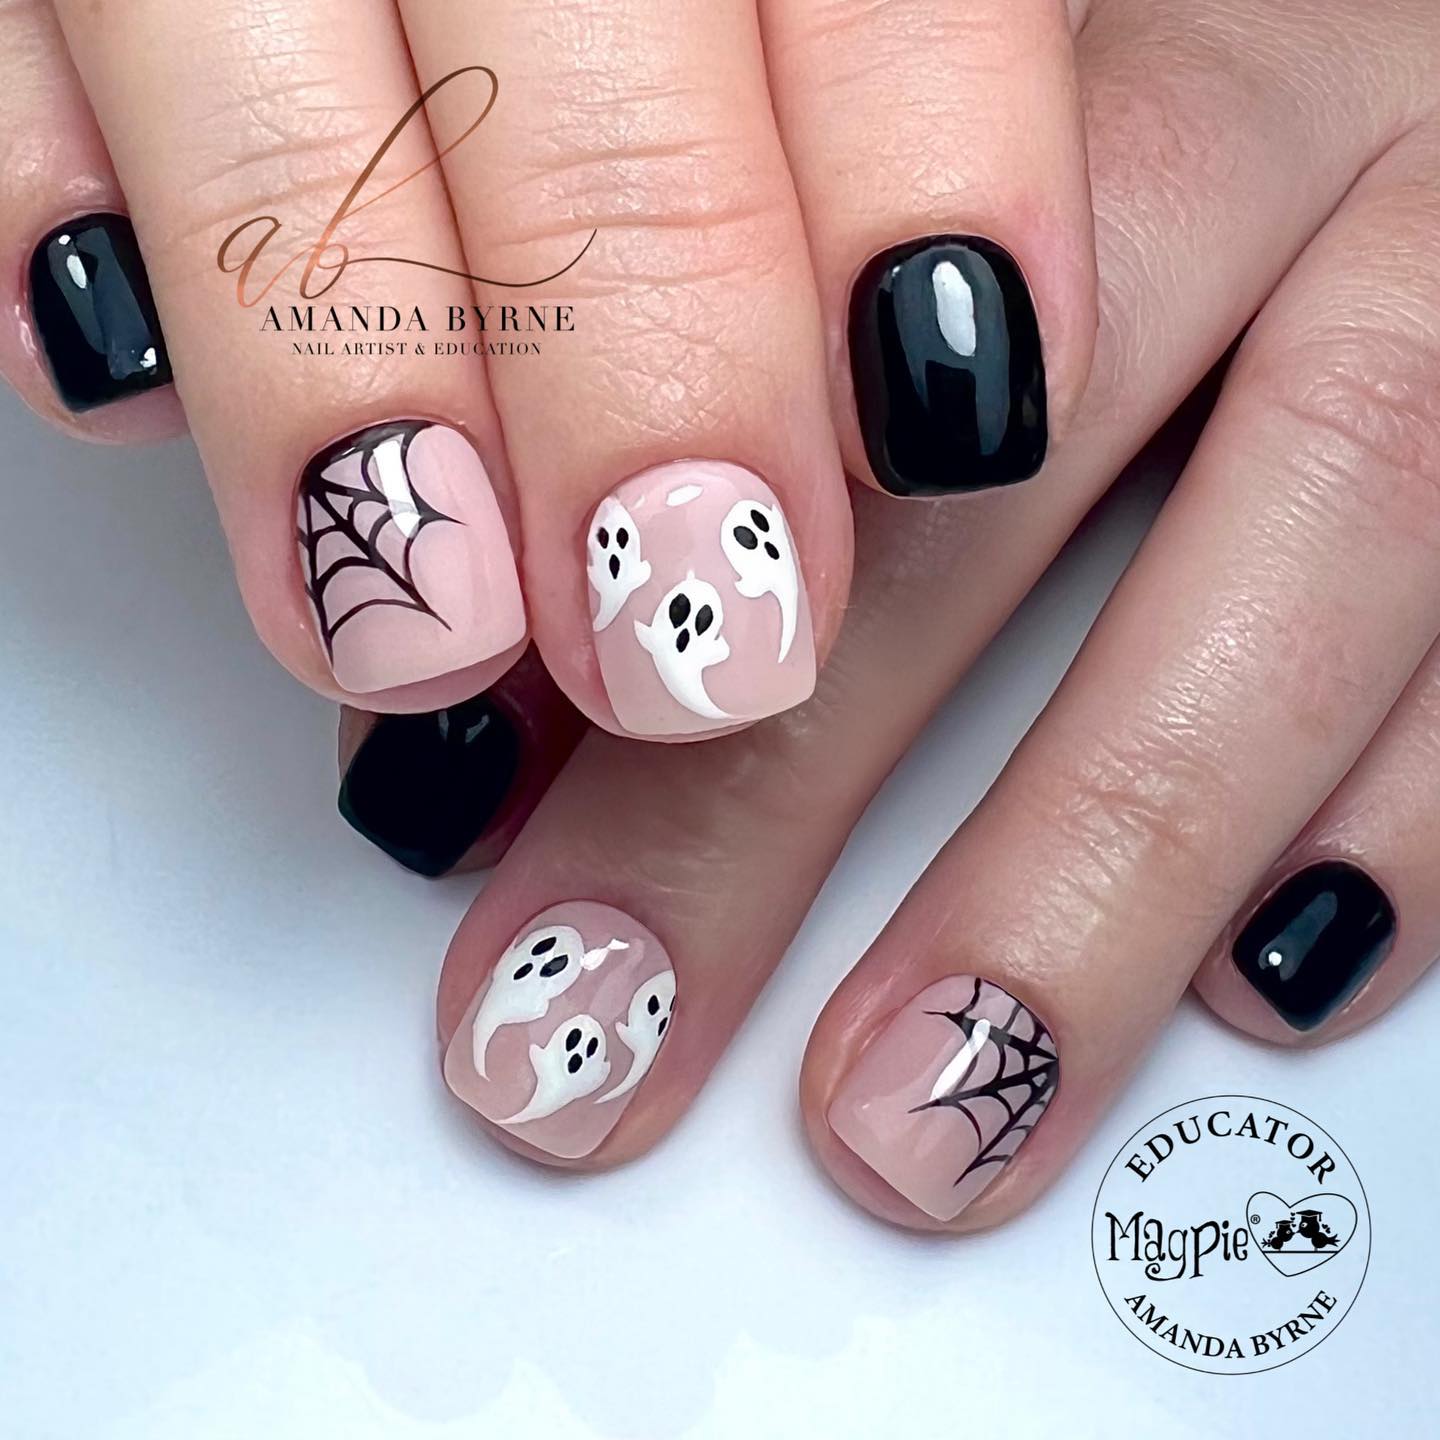 The best thing about Halloween is getting to try out some awesome and creative Halloween nails. Let's scare your friends with spider webs and ghosts.